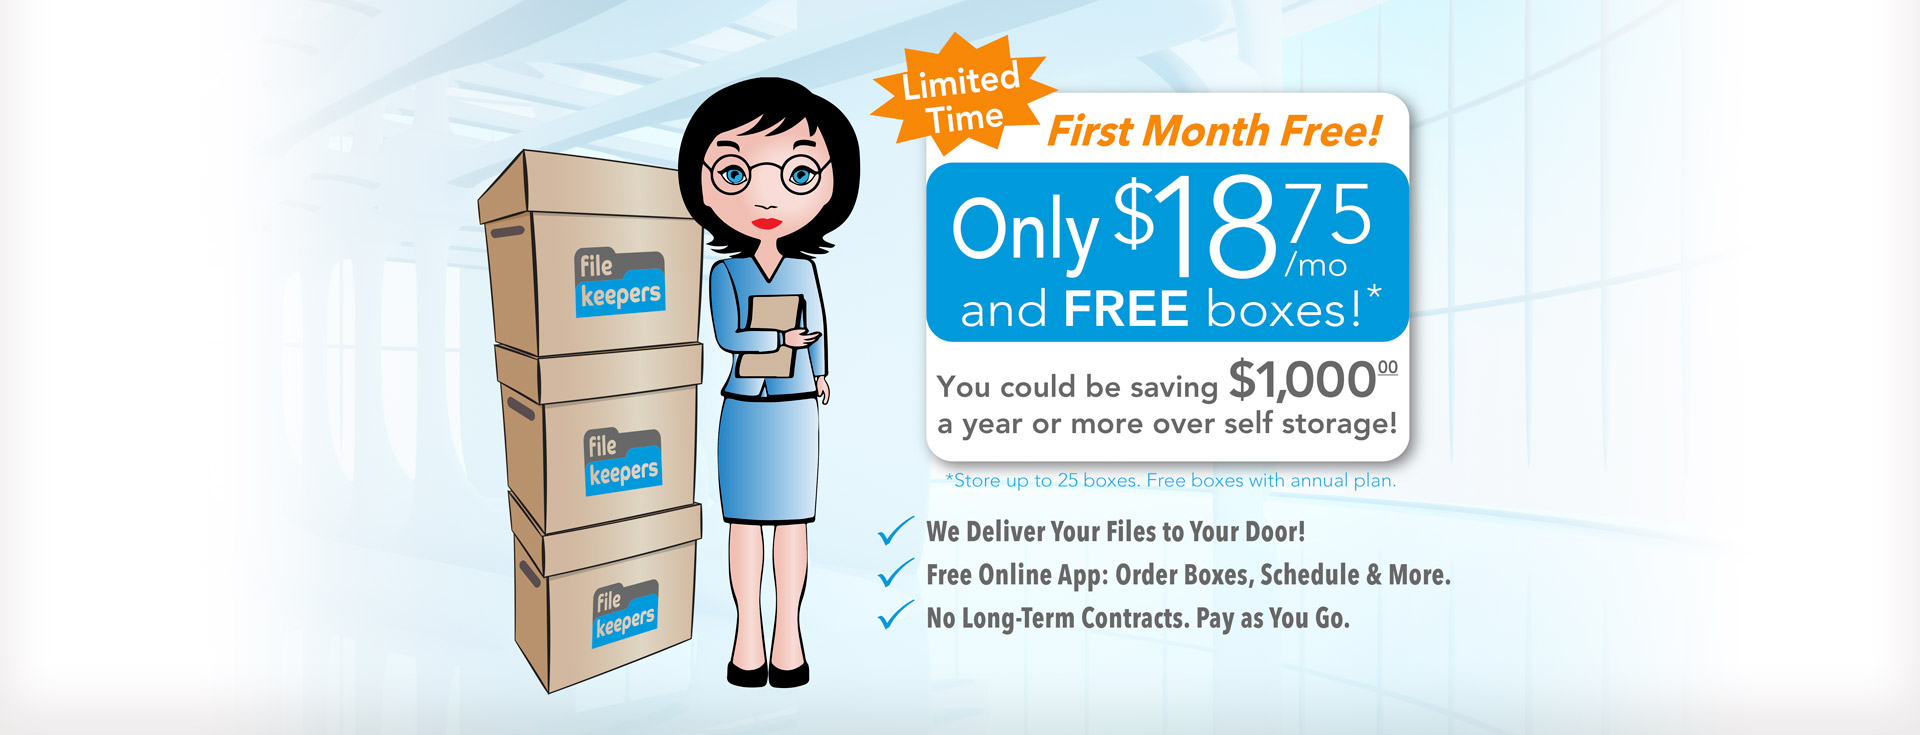 File Keepers - For a limited time, Store up to 25 boxes for only $18.75 per month.